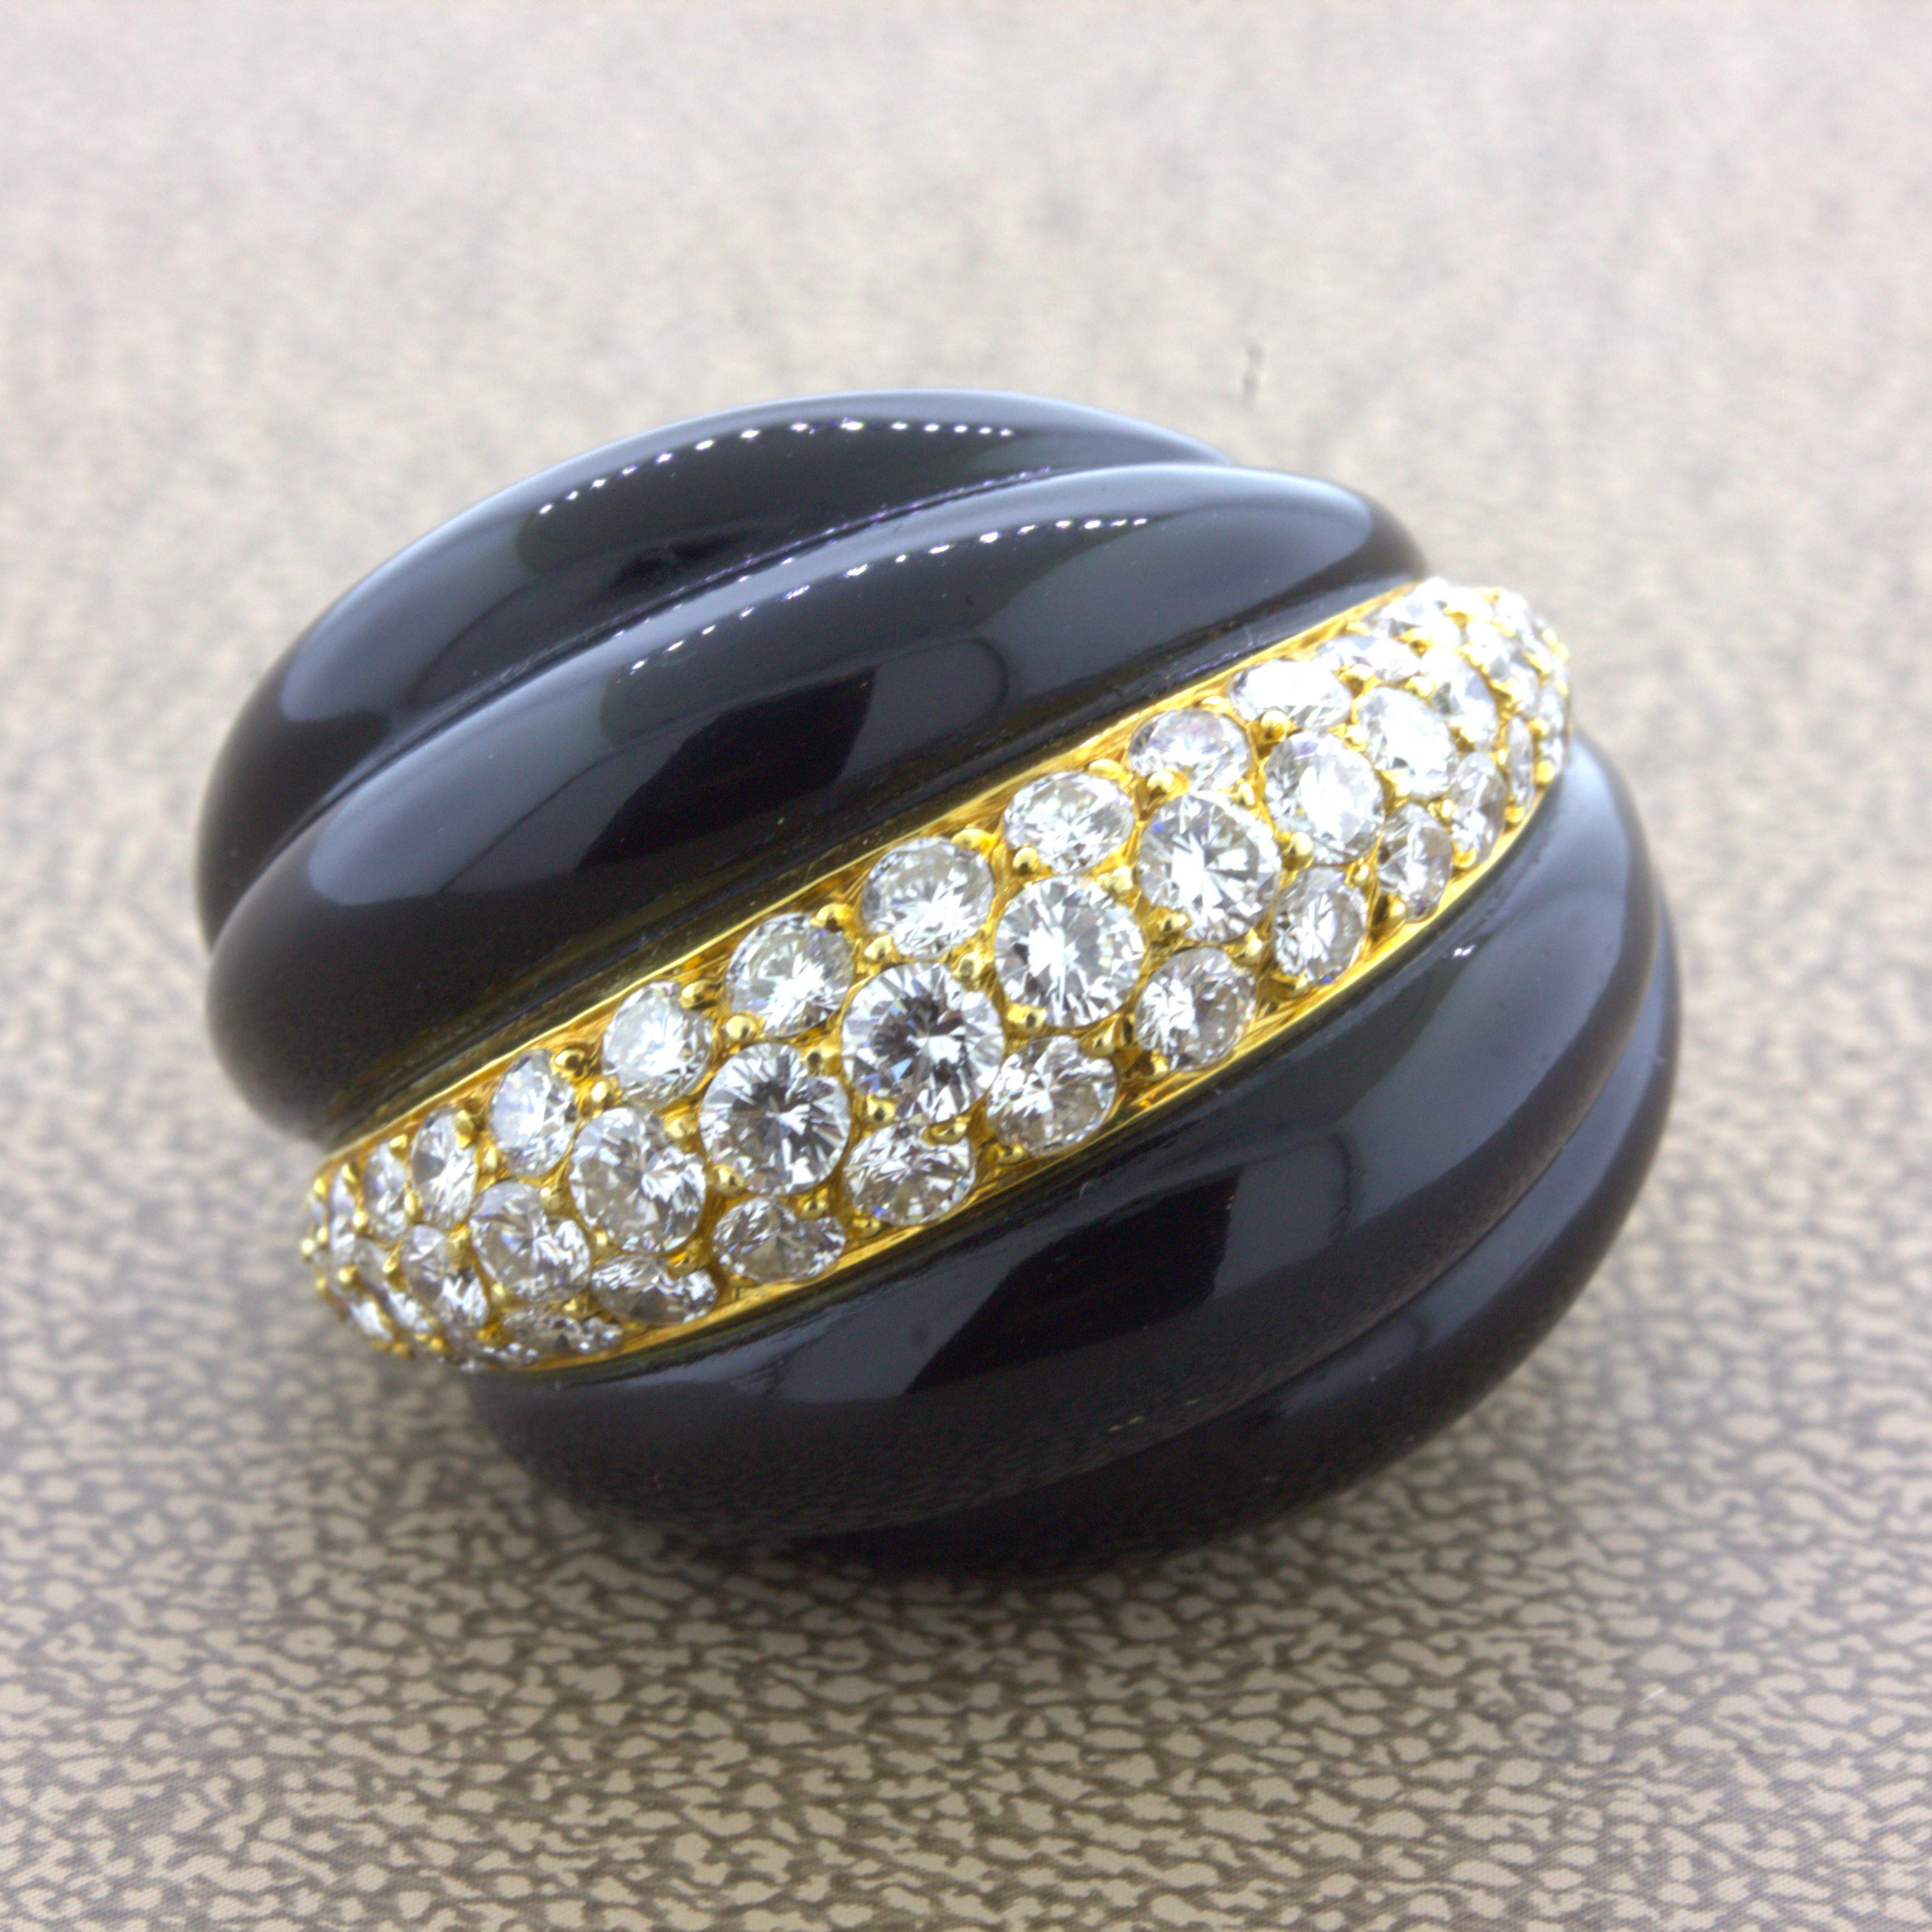 Fred Paris Diamond Onyx 18K Yellow Gold Cocktail Ring, French

A chic and elegant cocktail ring by Fred Paris. It features 2 pieces of hand-carved and polished black onyx which are smooth with waves. In between them are a bright row of round